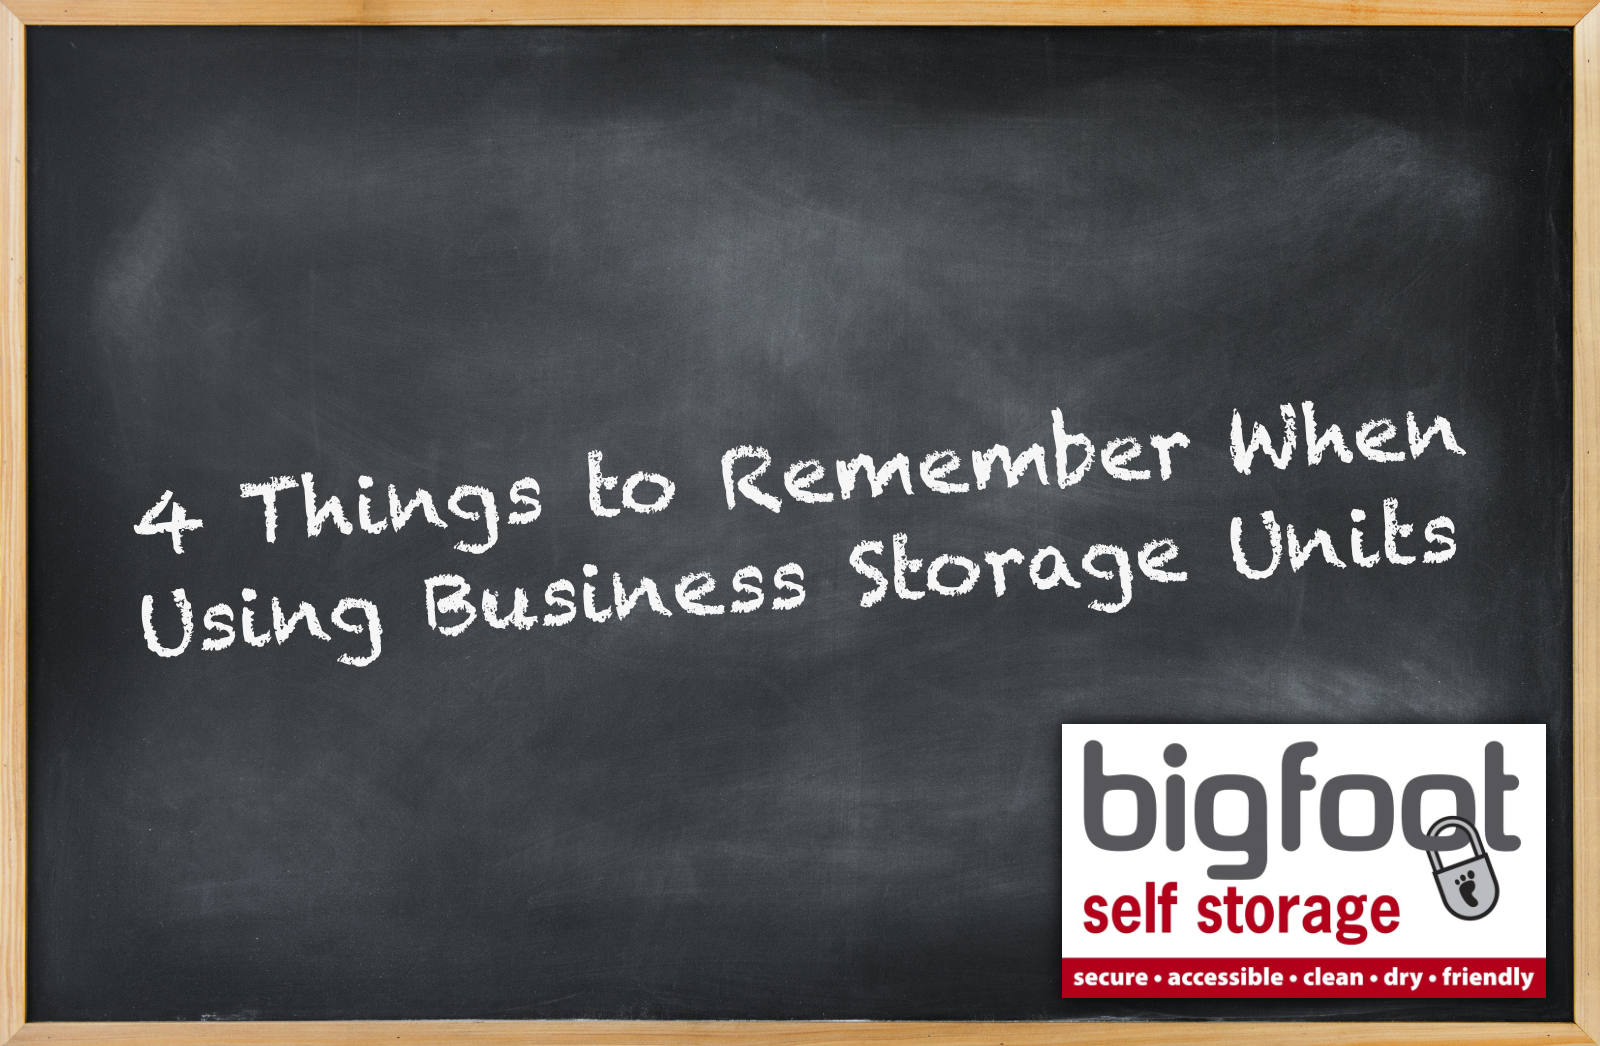 4 things to remember when using business storage units